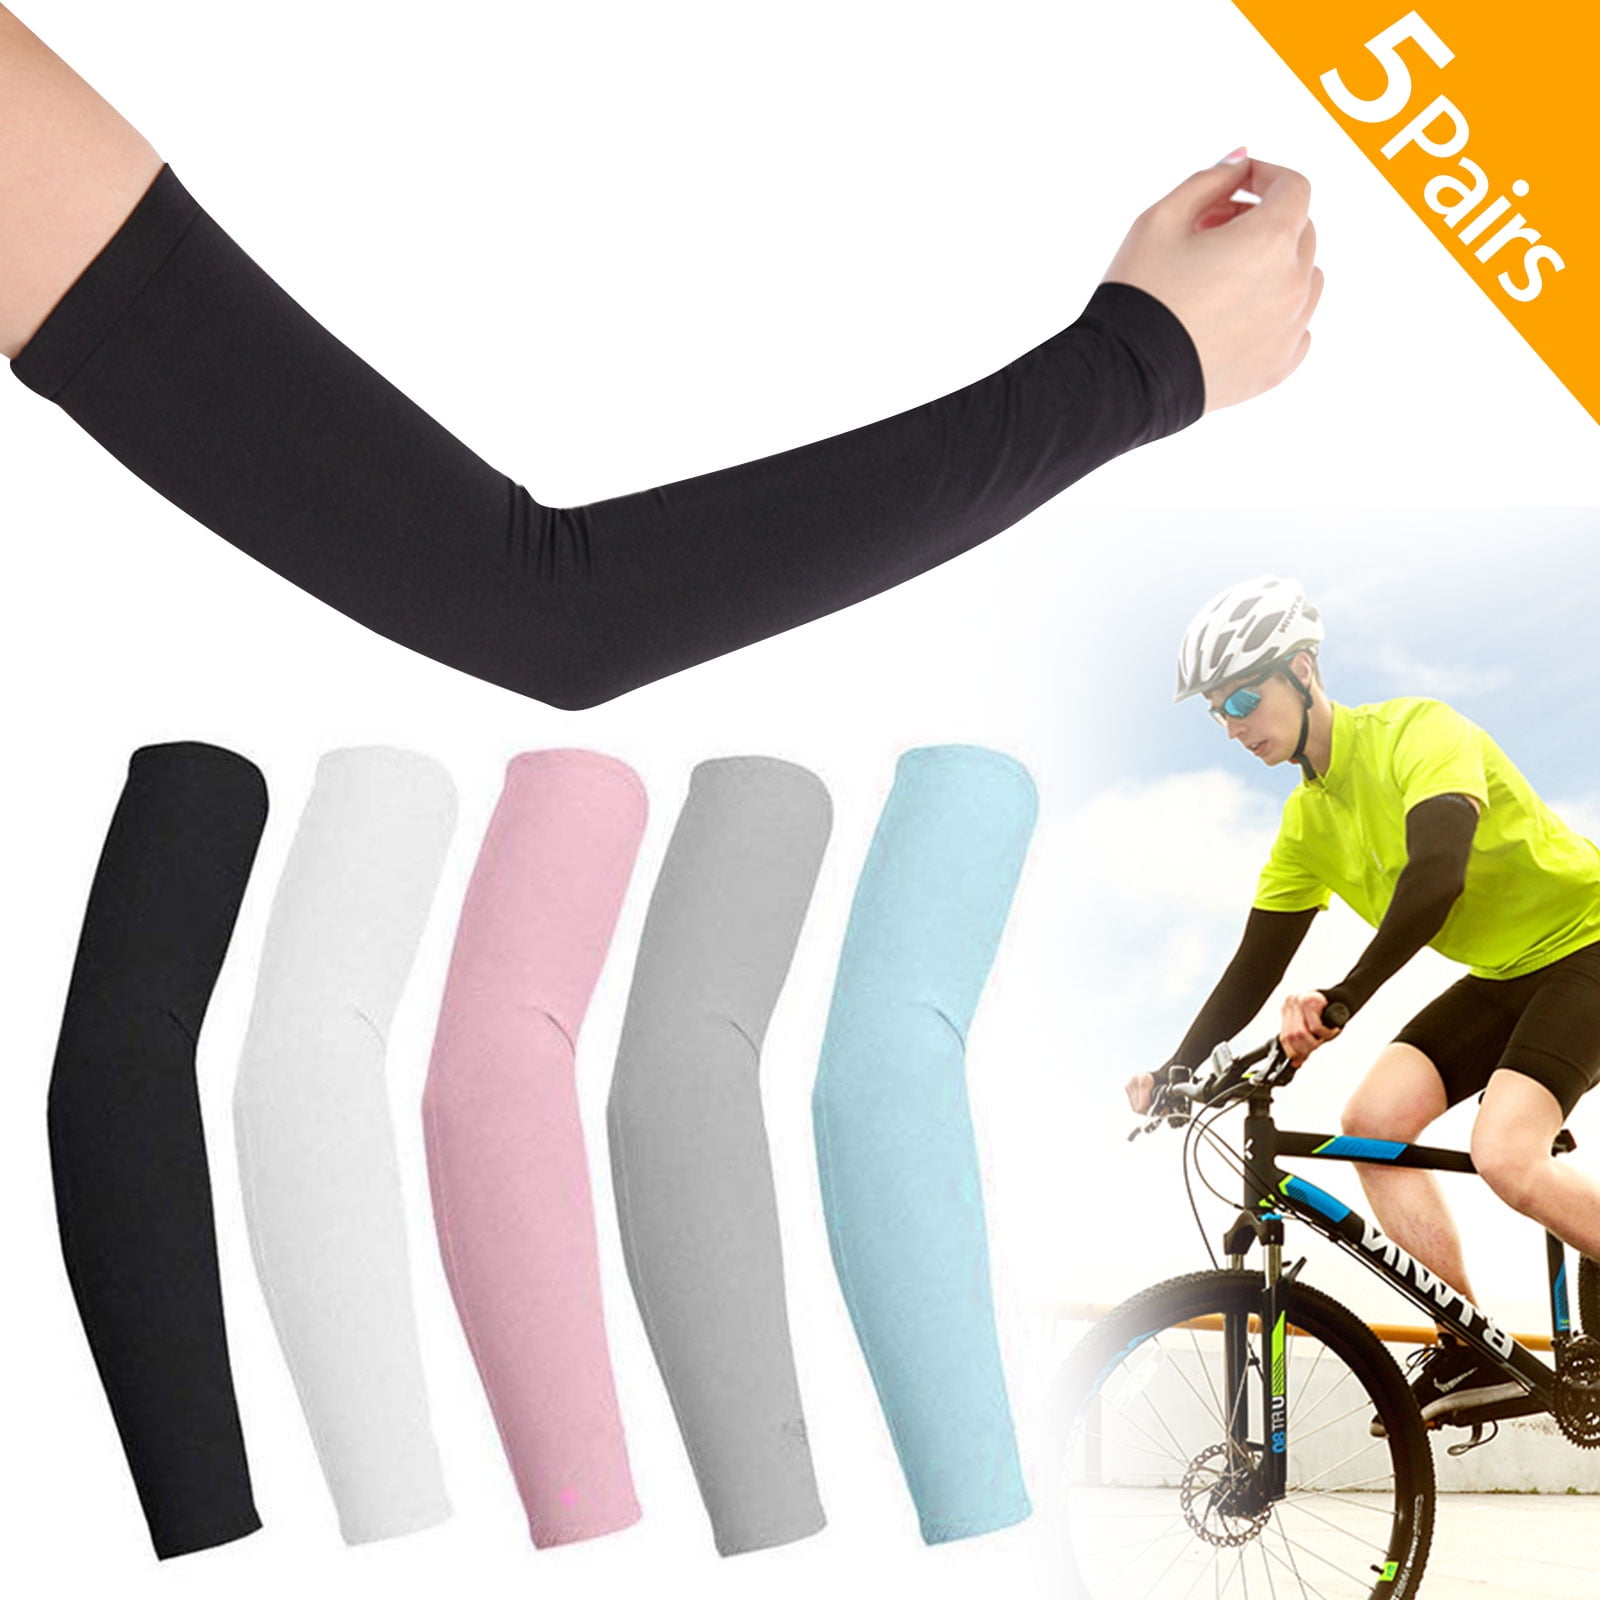 2 Pairs Women Men Arm Sleeves Cover Cycling Sport UV Sun Protector Cooling Cover 